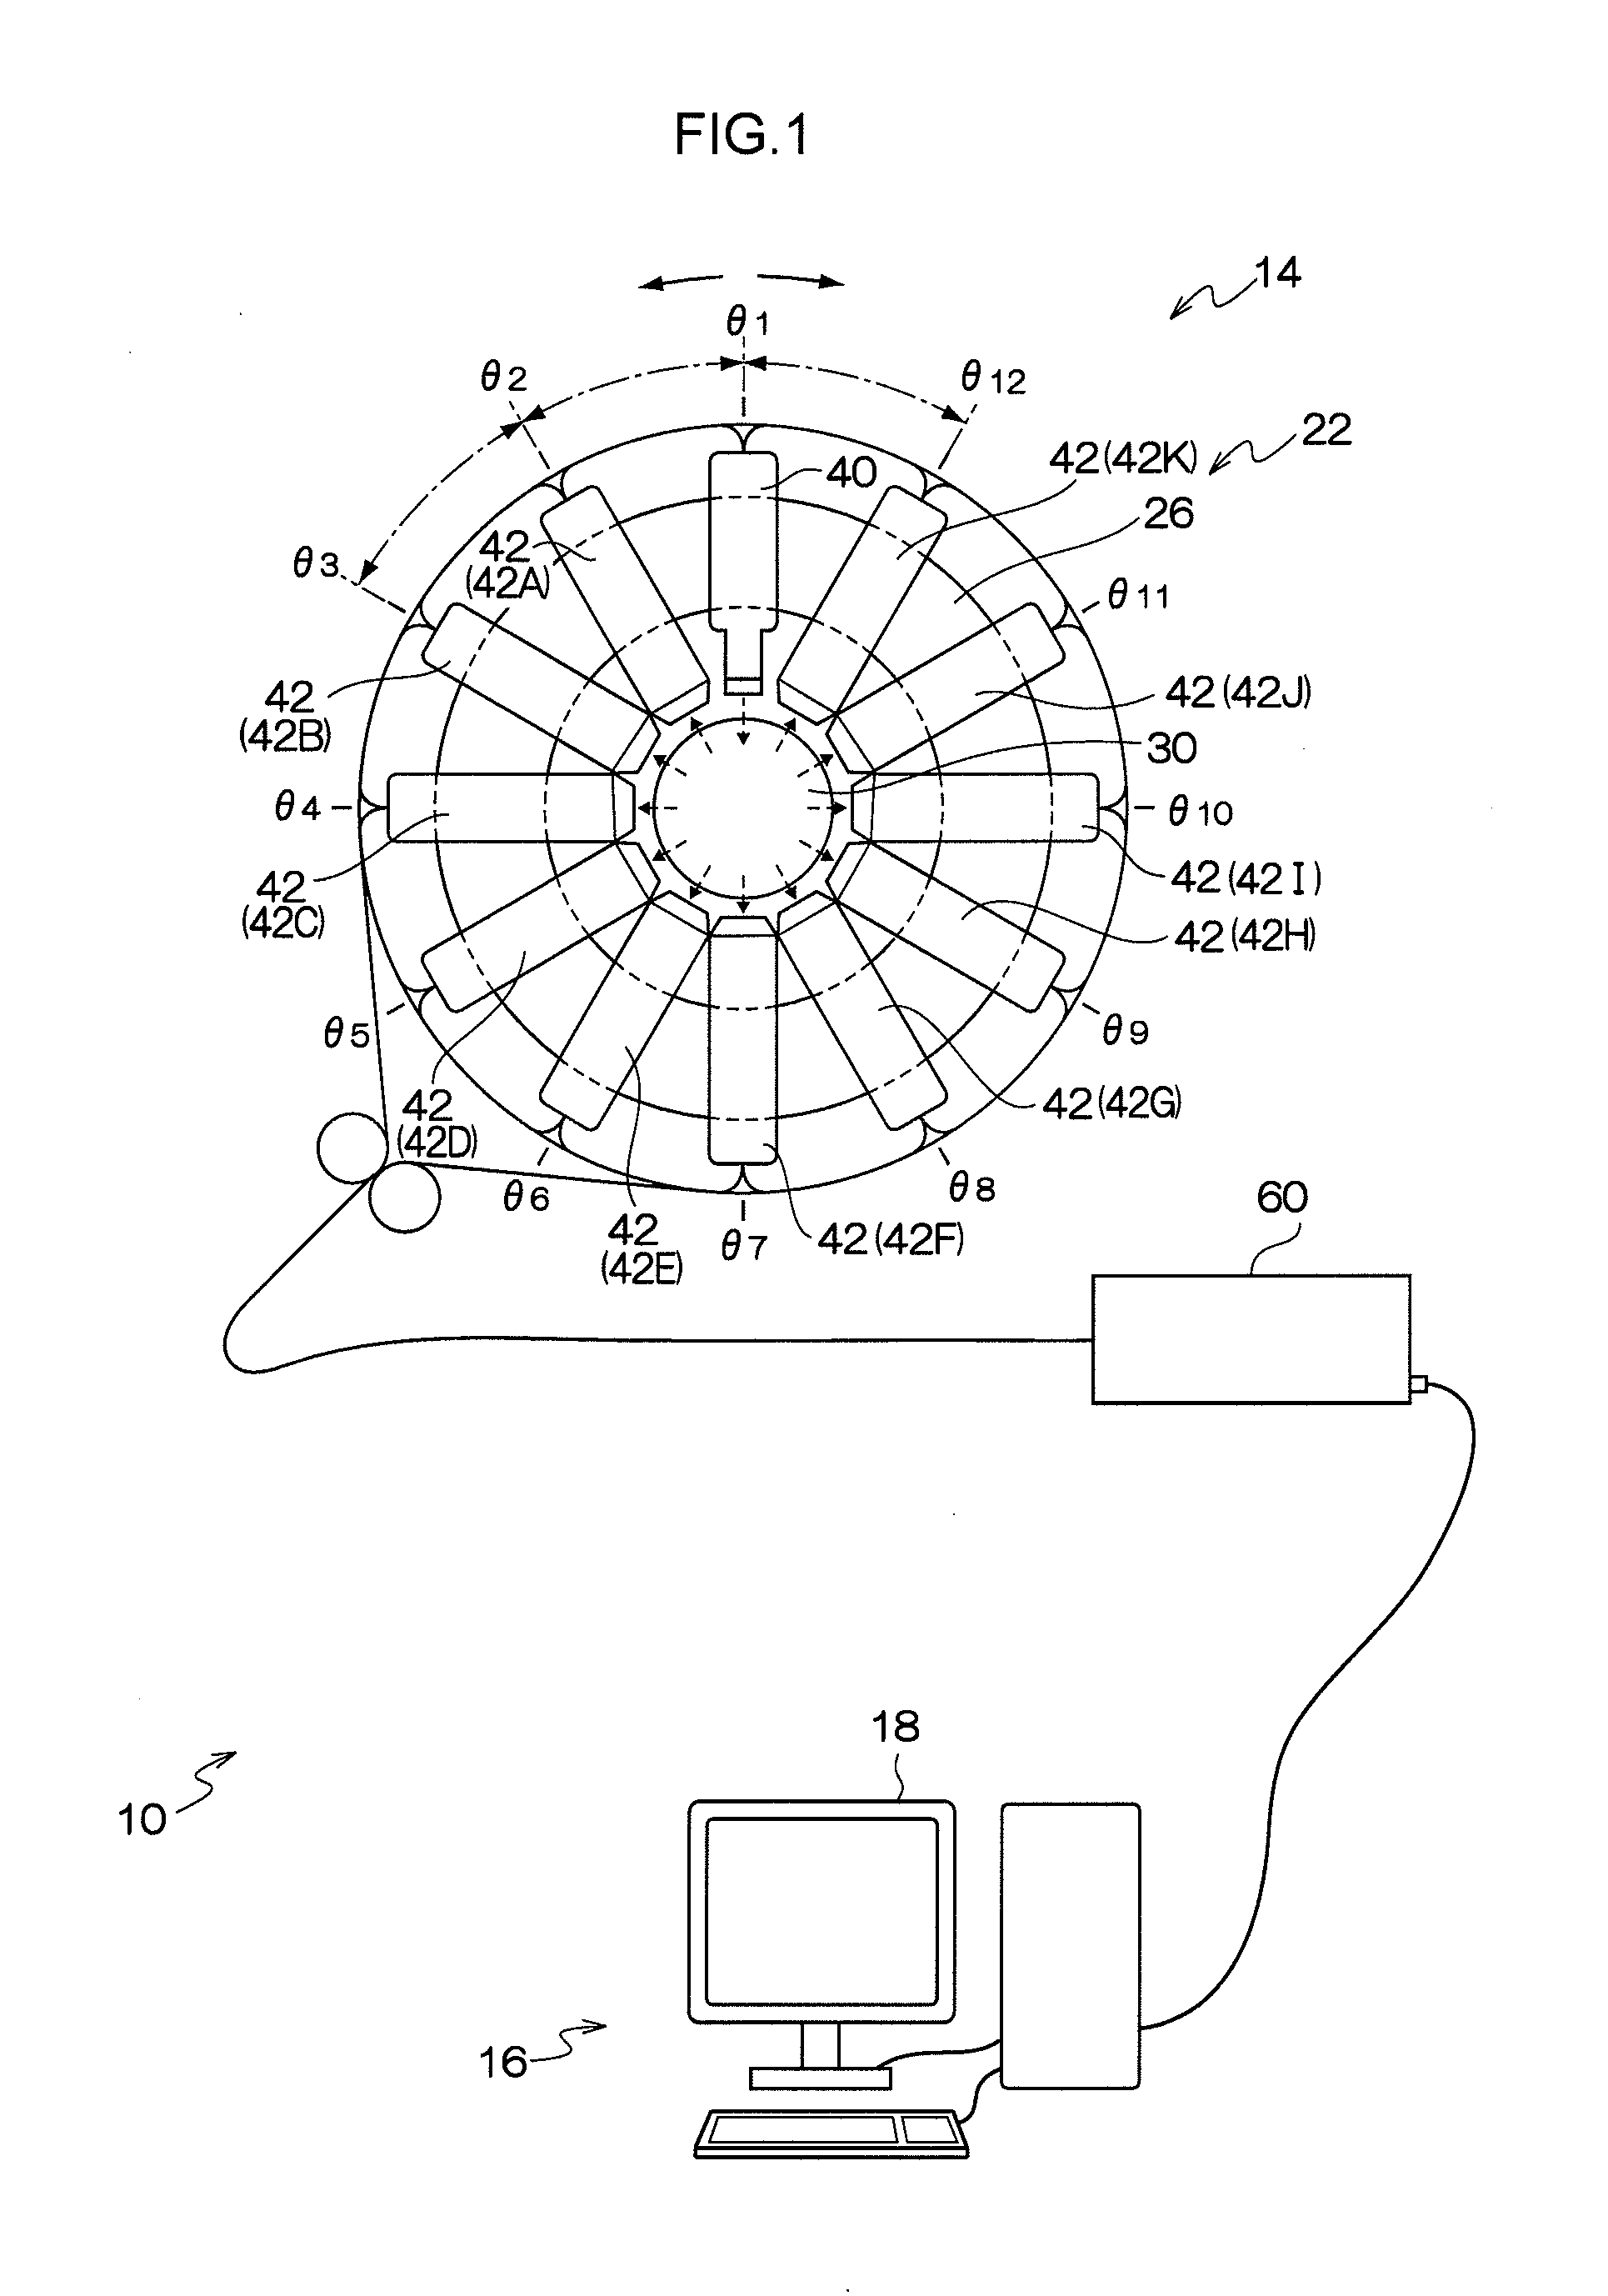 Optical tomographic measuring device